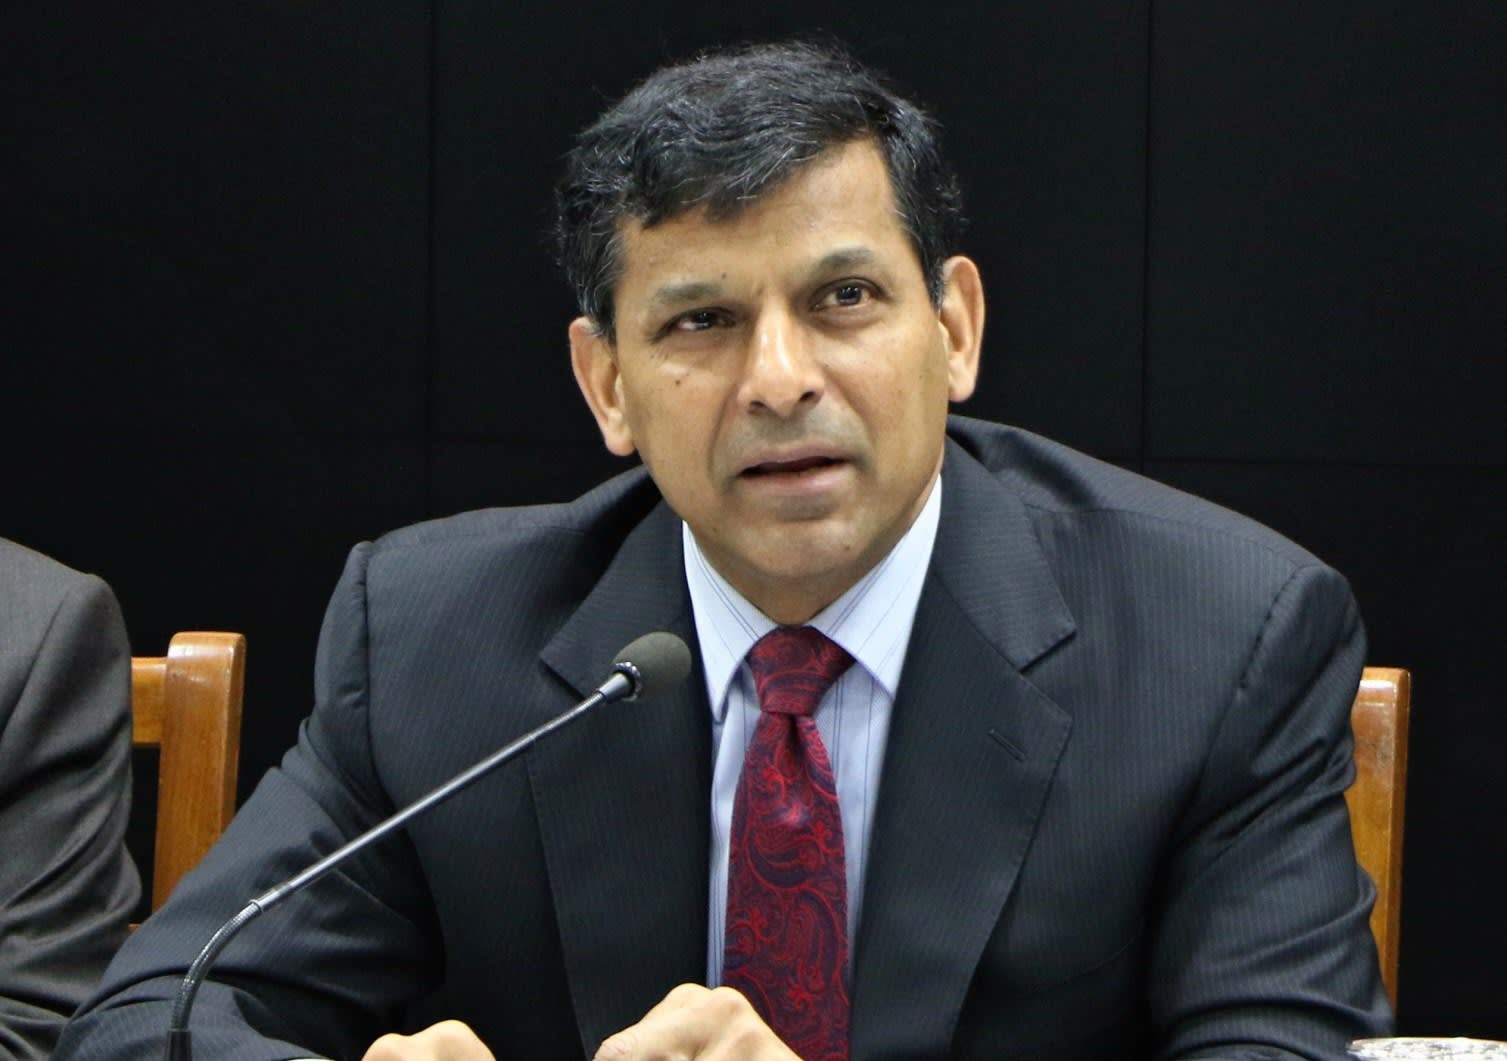 Explore the Intellectual Treasury With The Best Raghuram Rajan Books Every Economics Enthusiast Should Read